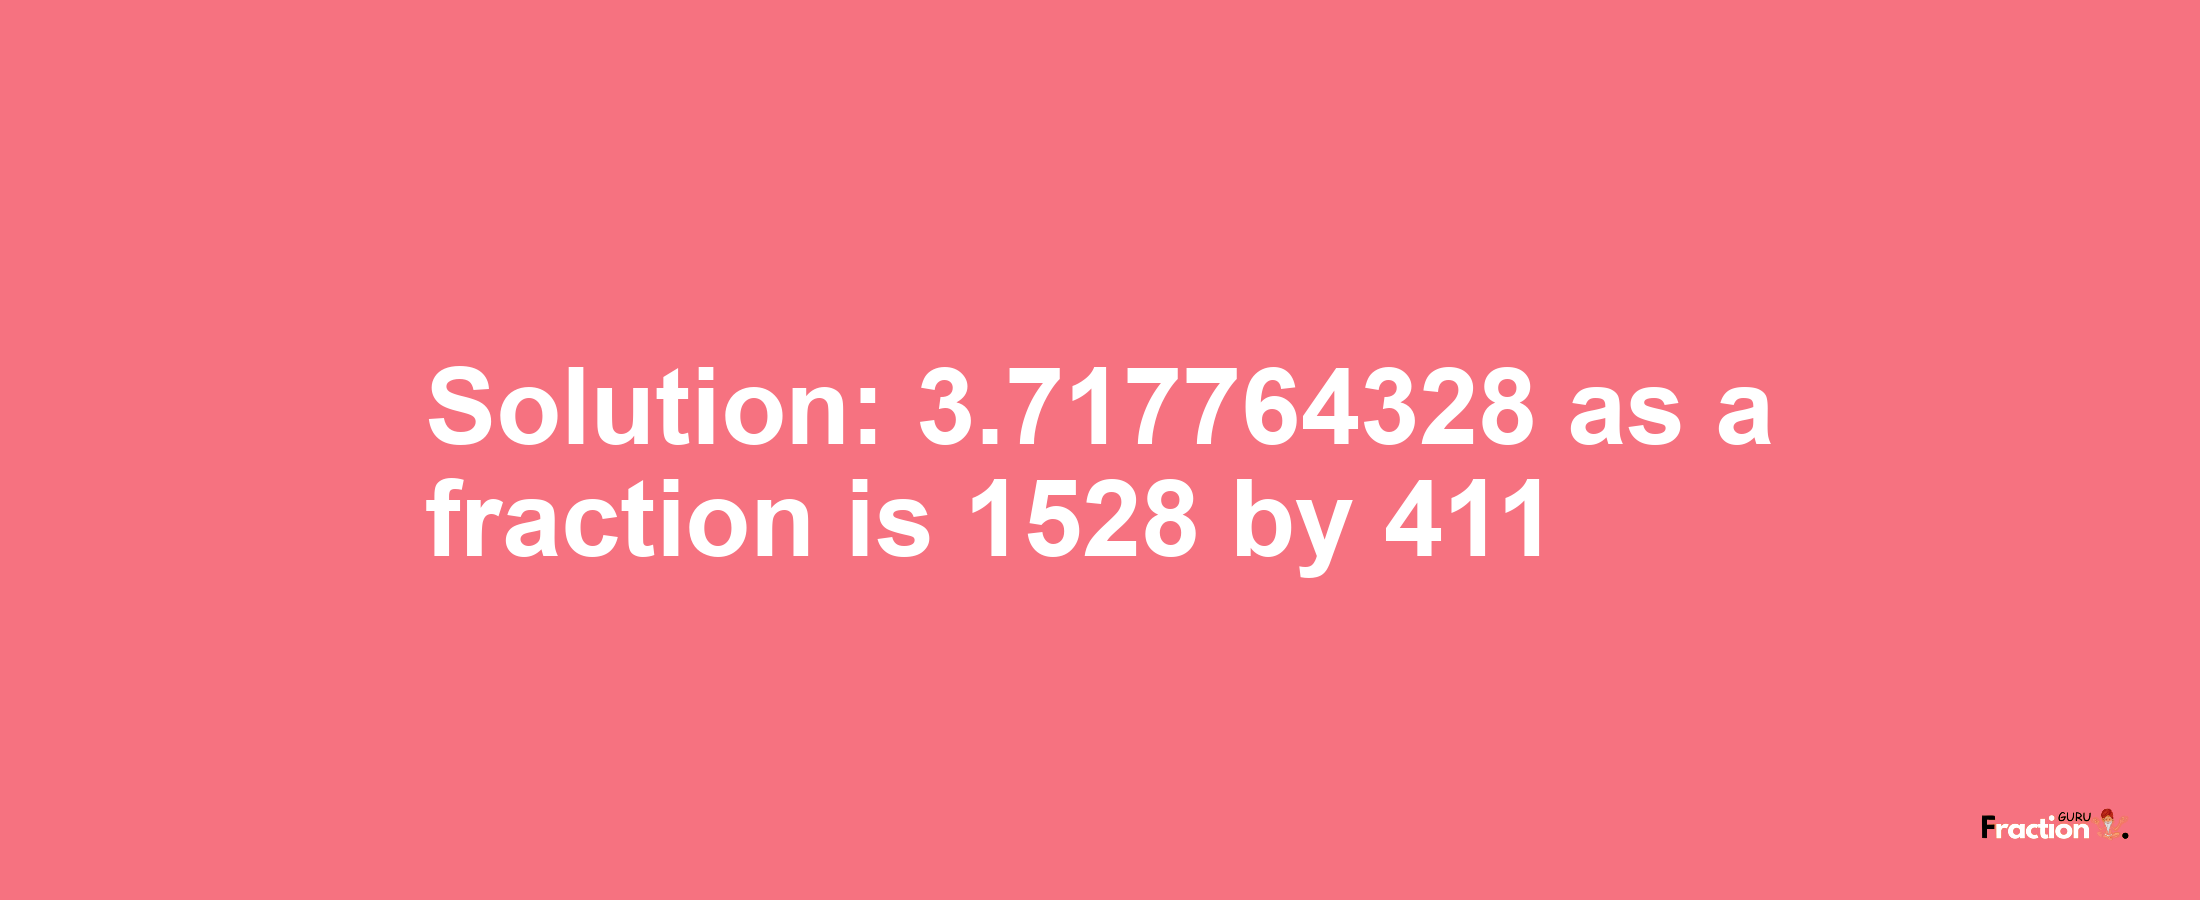 Solution:3.717764328 as a fraction is 1528/411